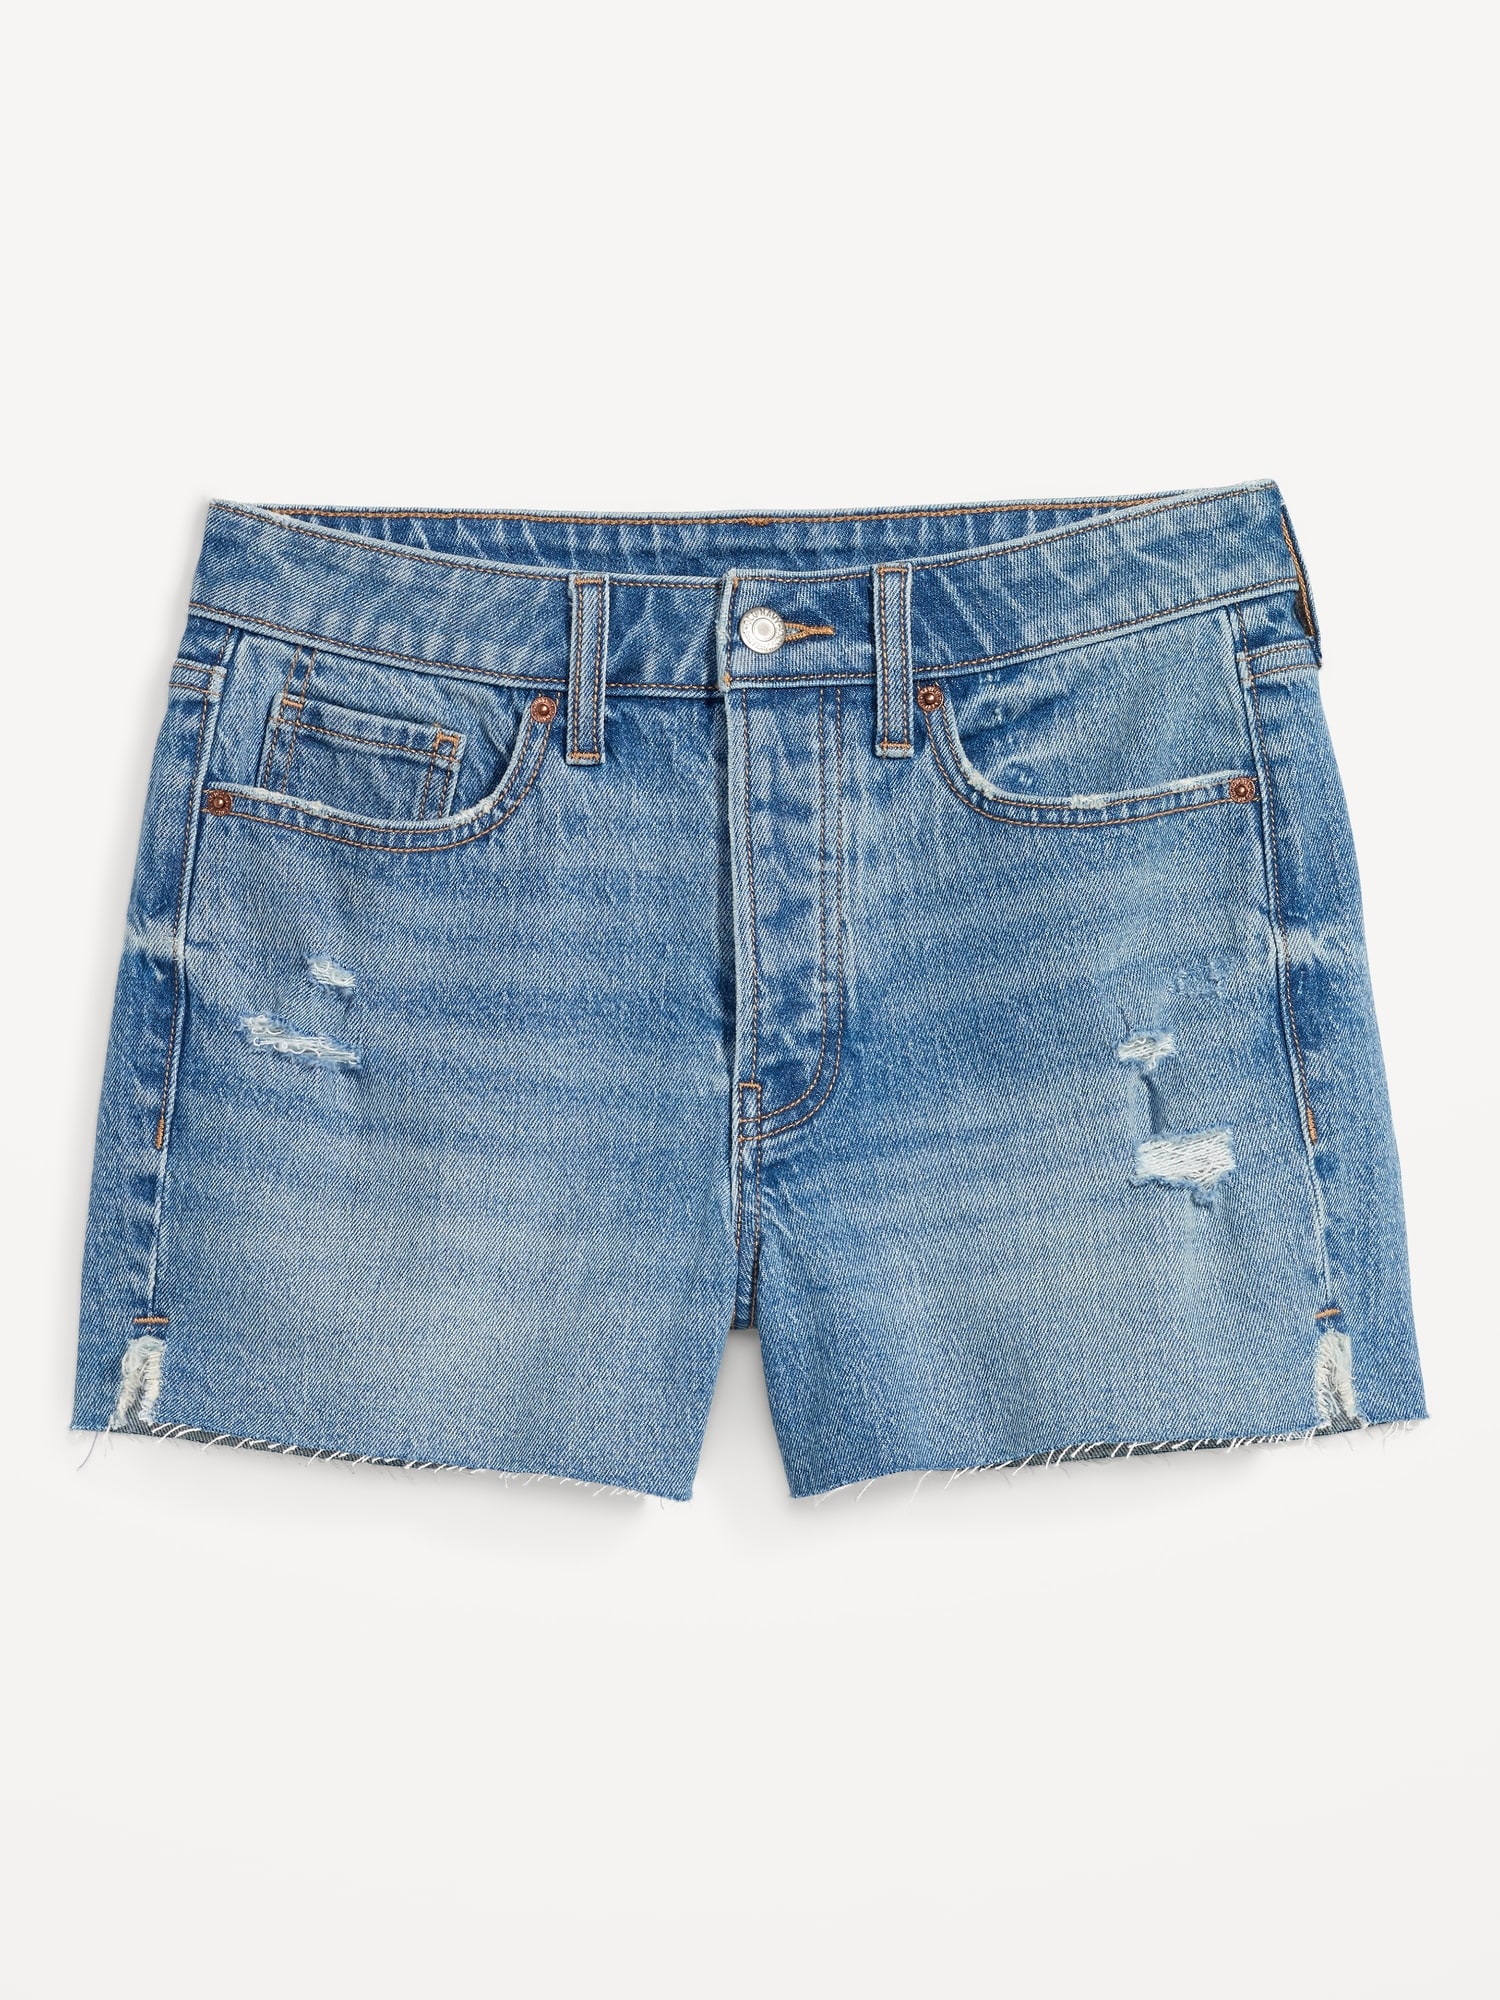 High-Waisted OG Jean Shorts -- 3-inch inseam | Old Navy